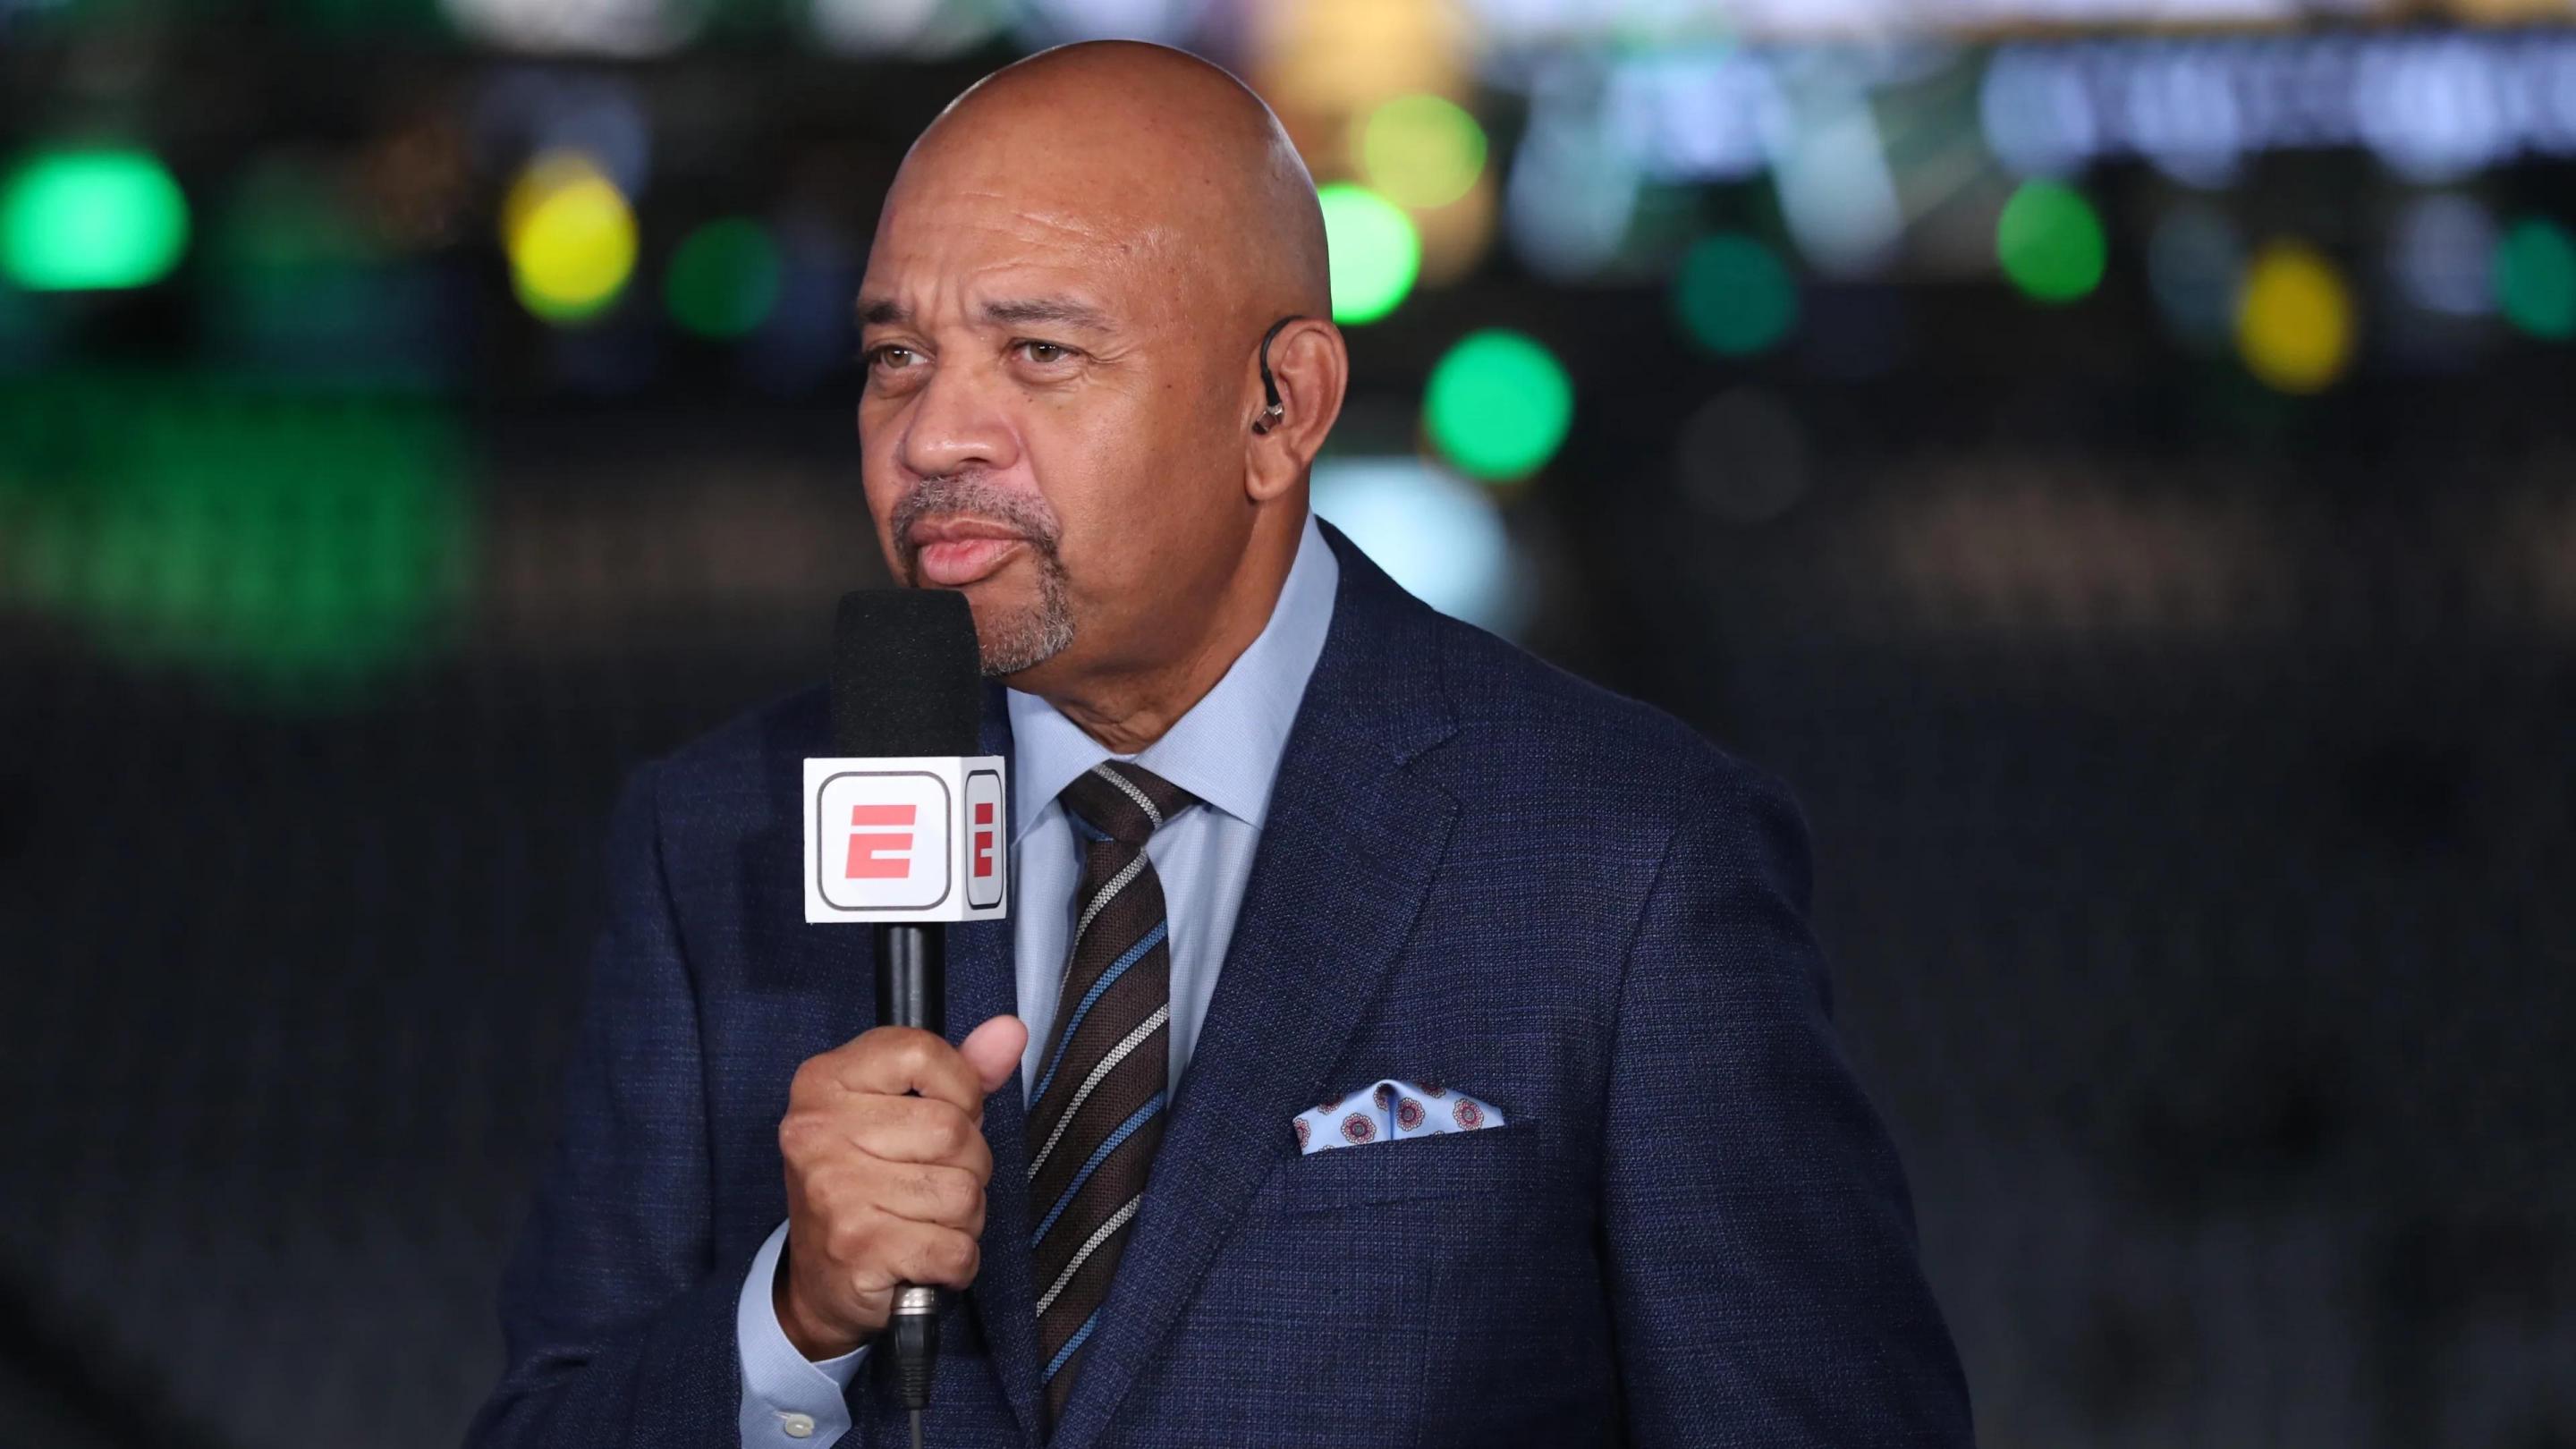 NBA TV Analyst Michael Wilbon previews the game between the Milwaukee Bucks and the Phoenix Suns during Game Three of the 2021 NBA Finals on July 11, 2021 at the Fiserv Forum Center in Milwaukee, Wisconsin.